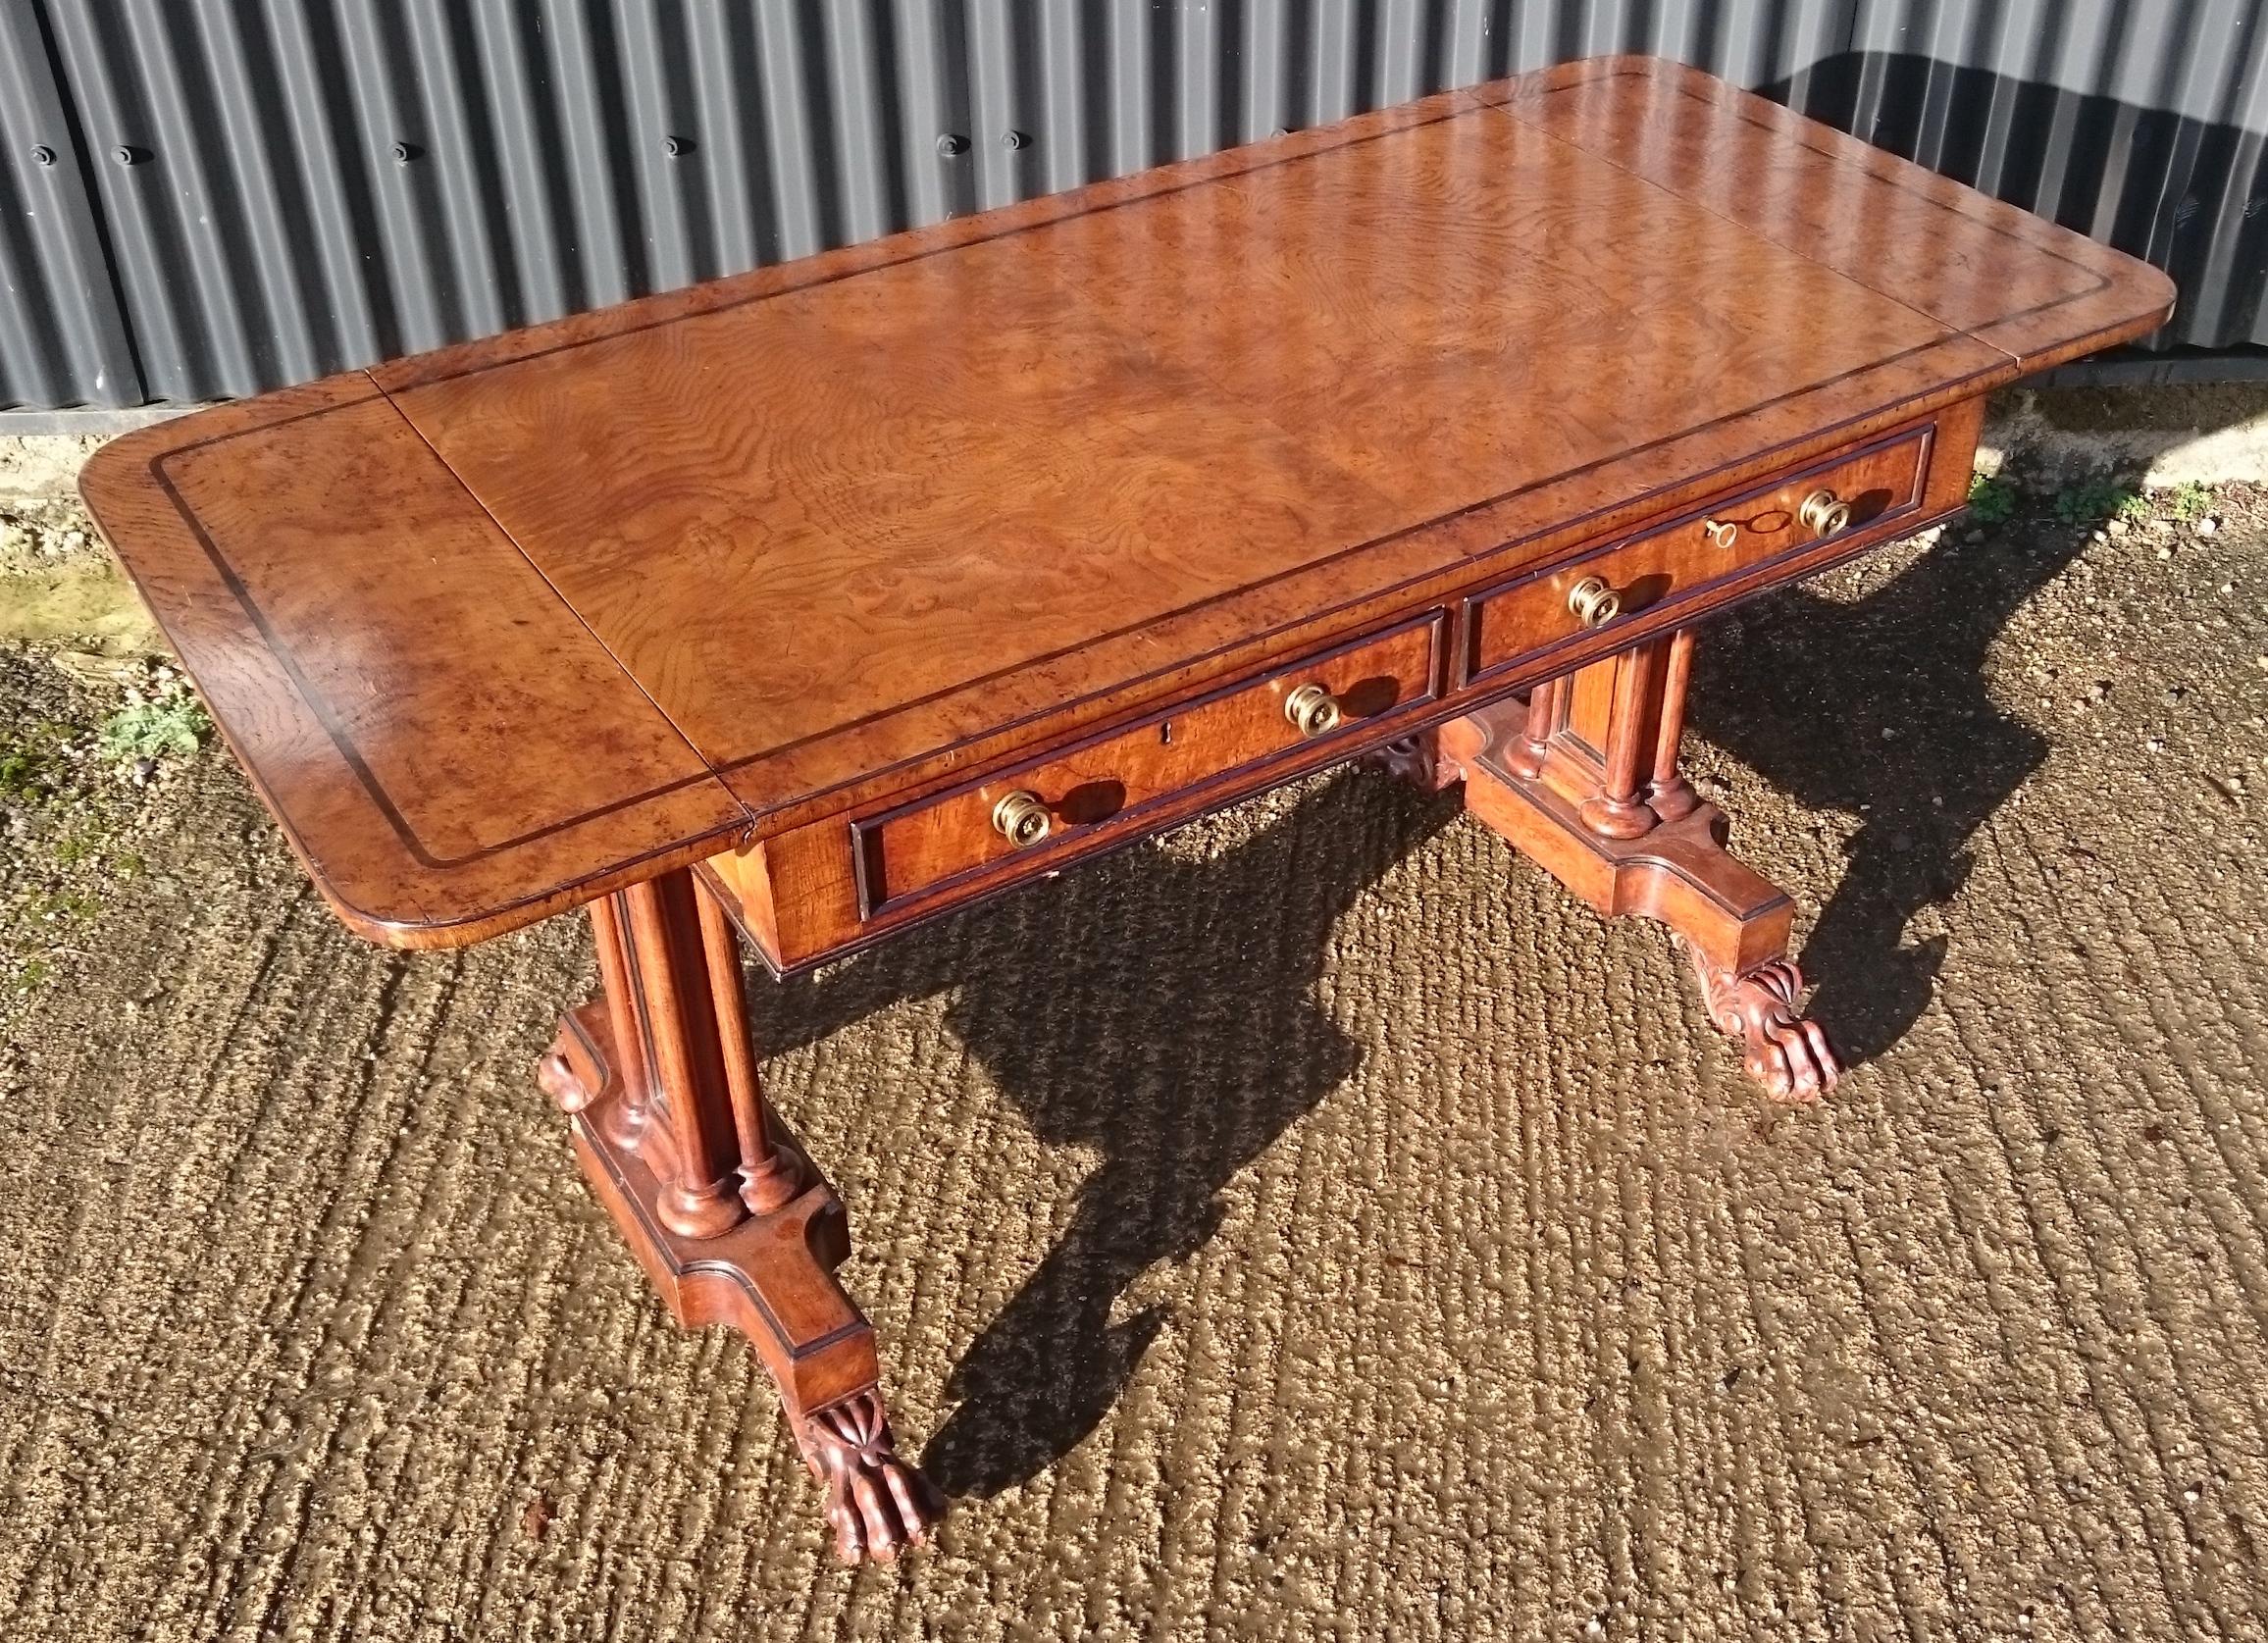 Regency Early 19th Century Sofa Table Made from Elm